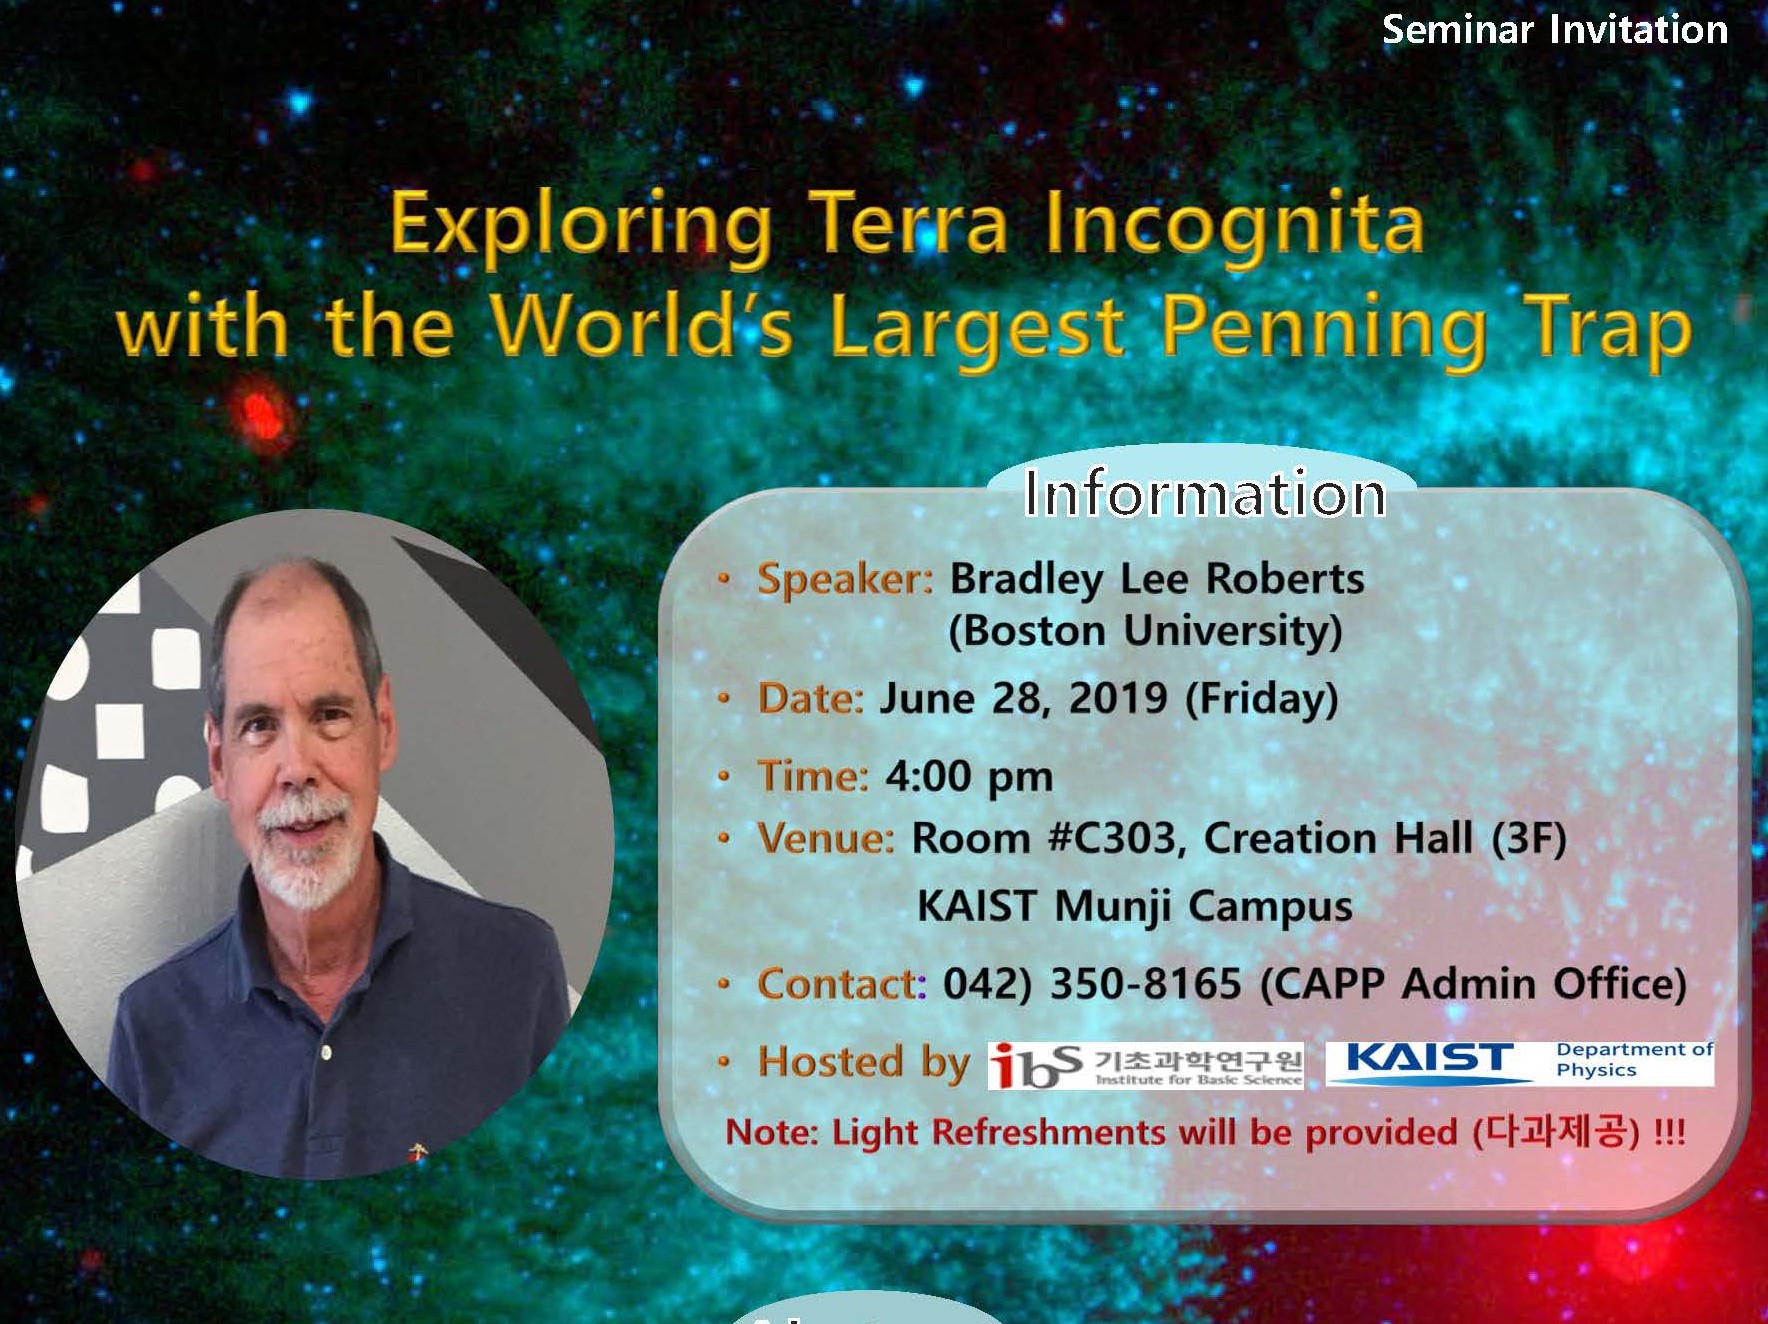 [CAPP 세미나] Exploring Terra Incognita with the World’s Largest Penning Trap 사진